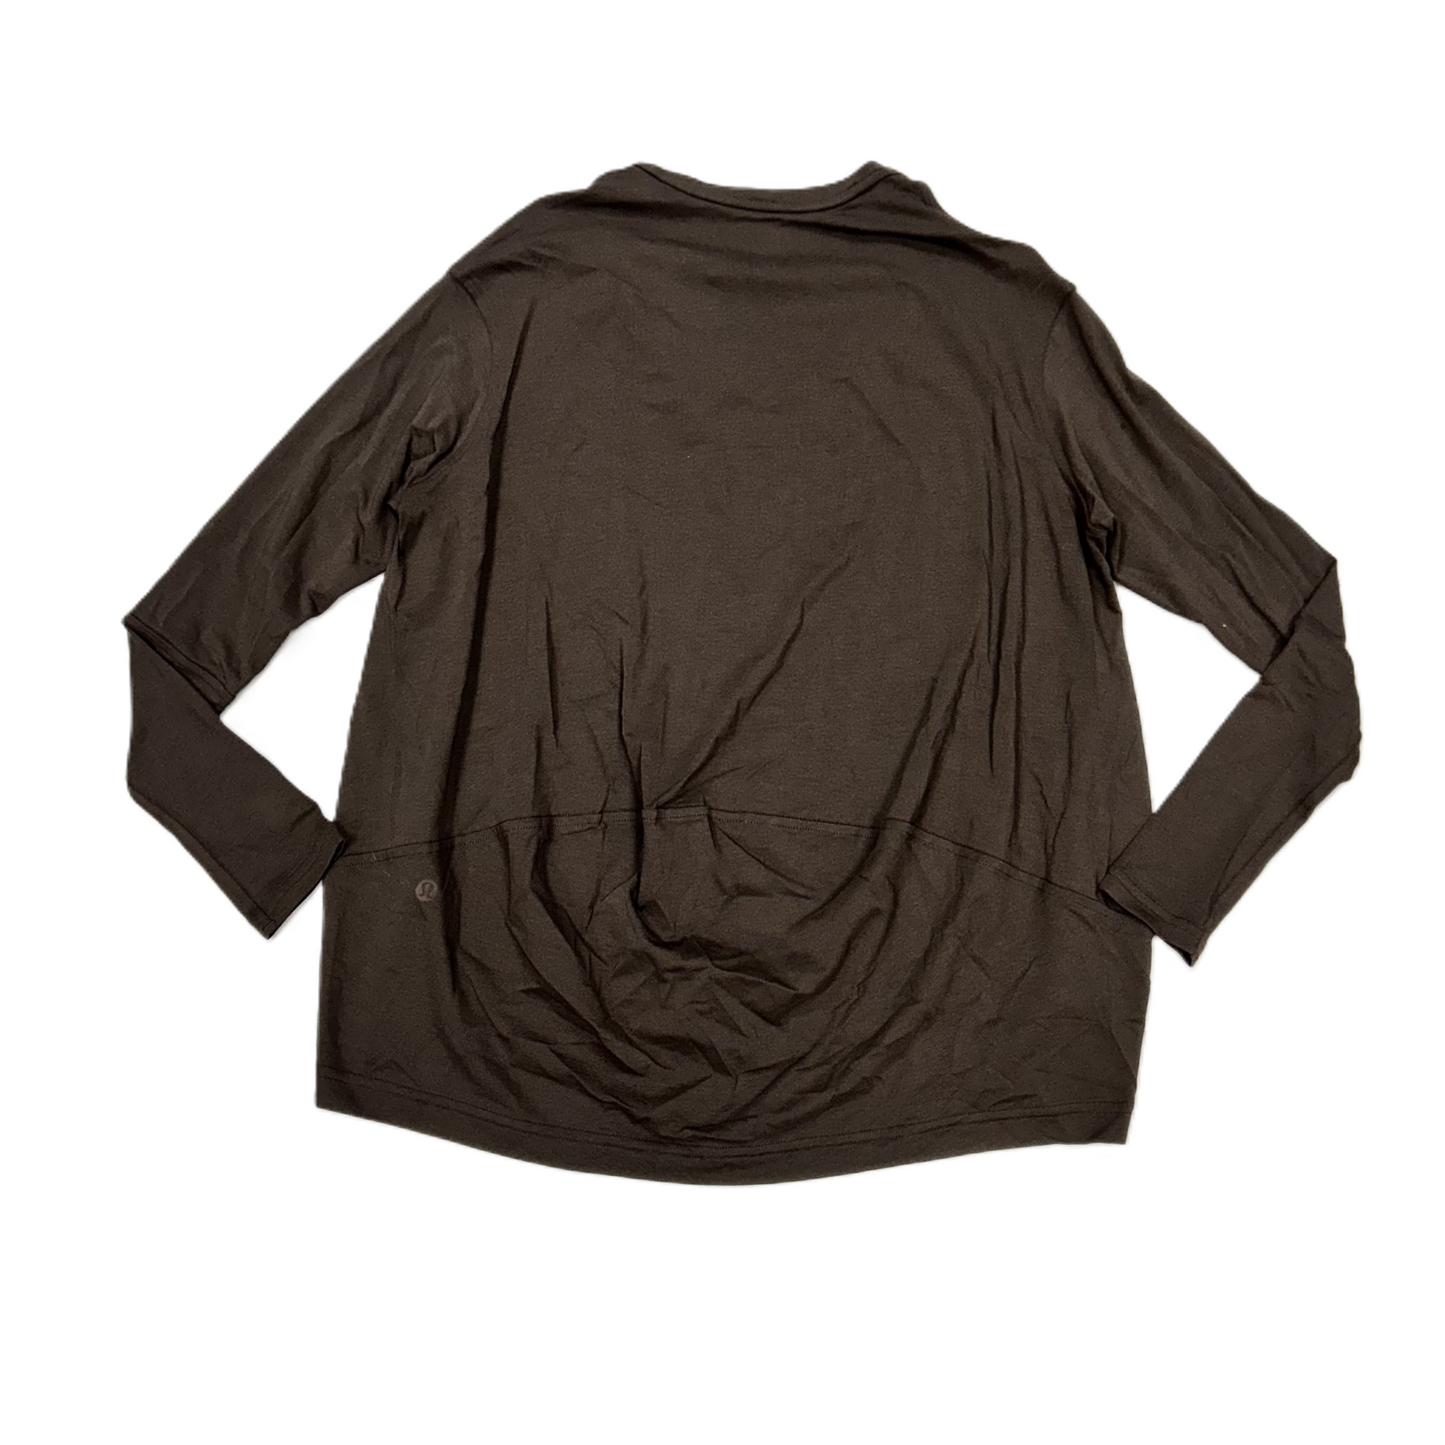 Brown Athletic Top Long Sleeve Crewneck By Lululemon, Size: Xs